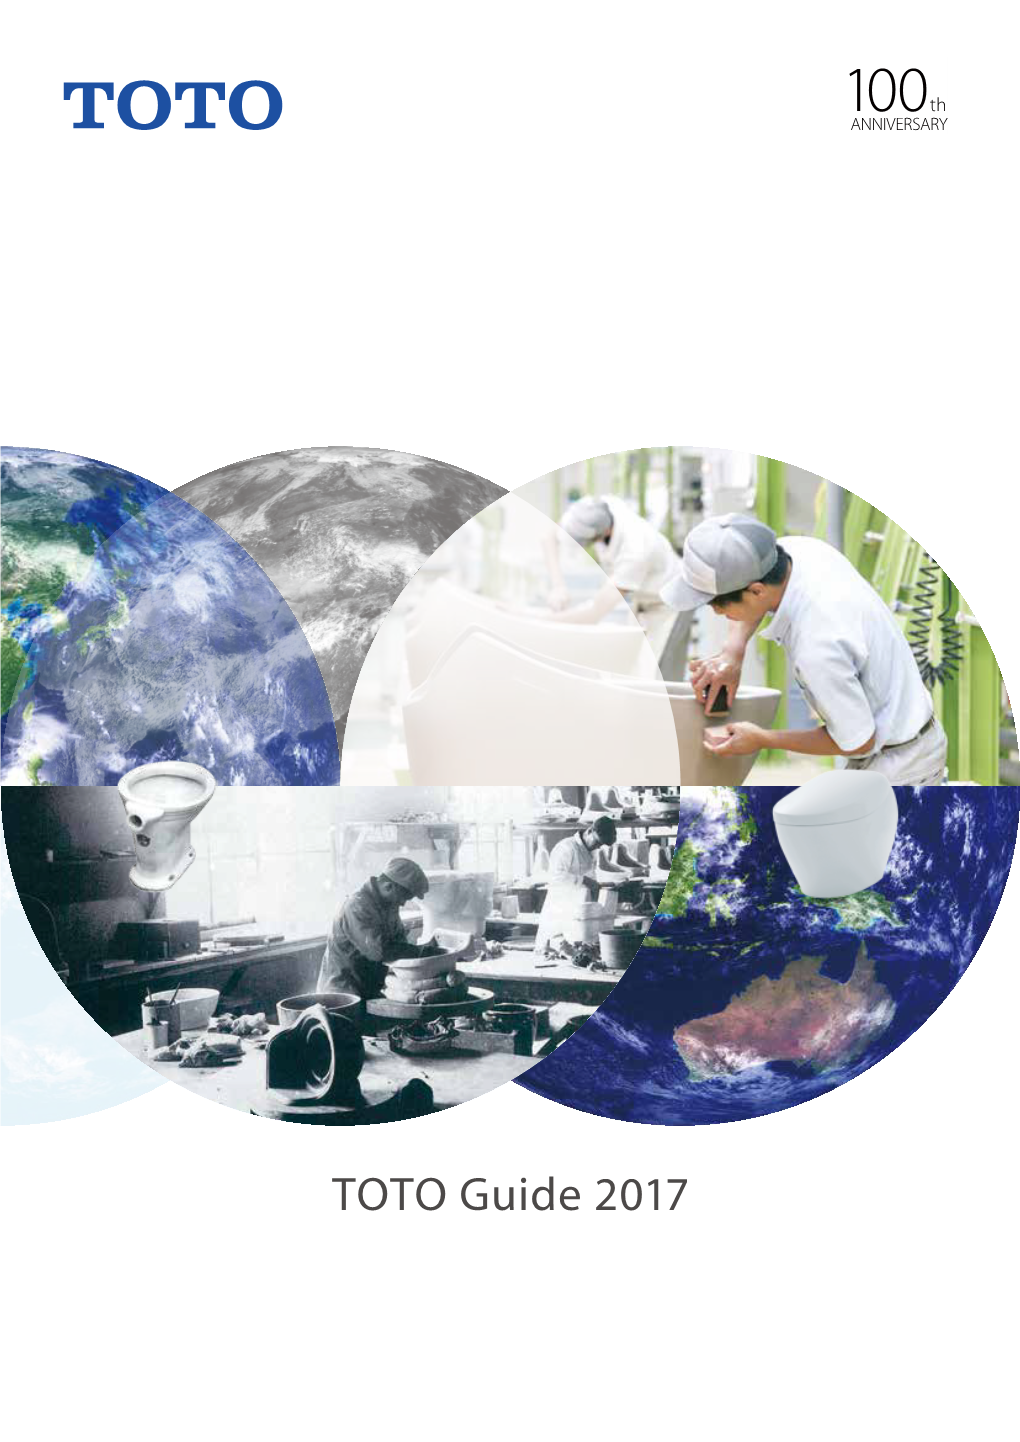 TOTO Guide 2017 Corporate Message